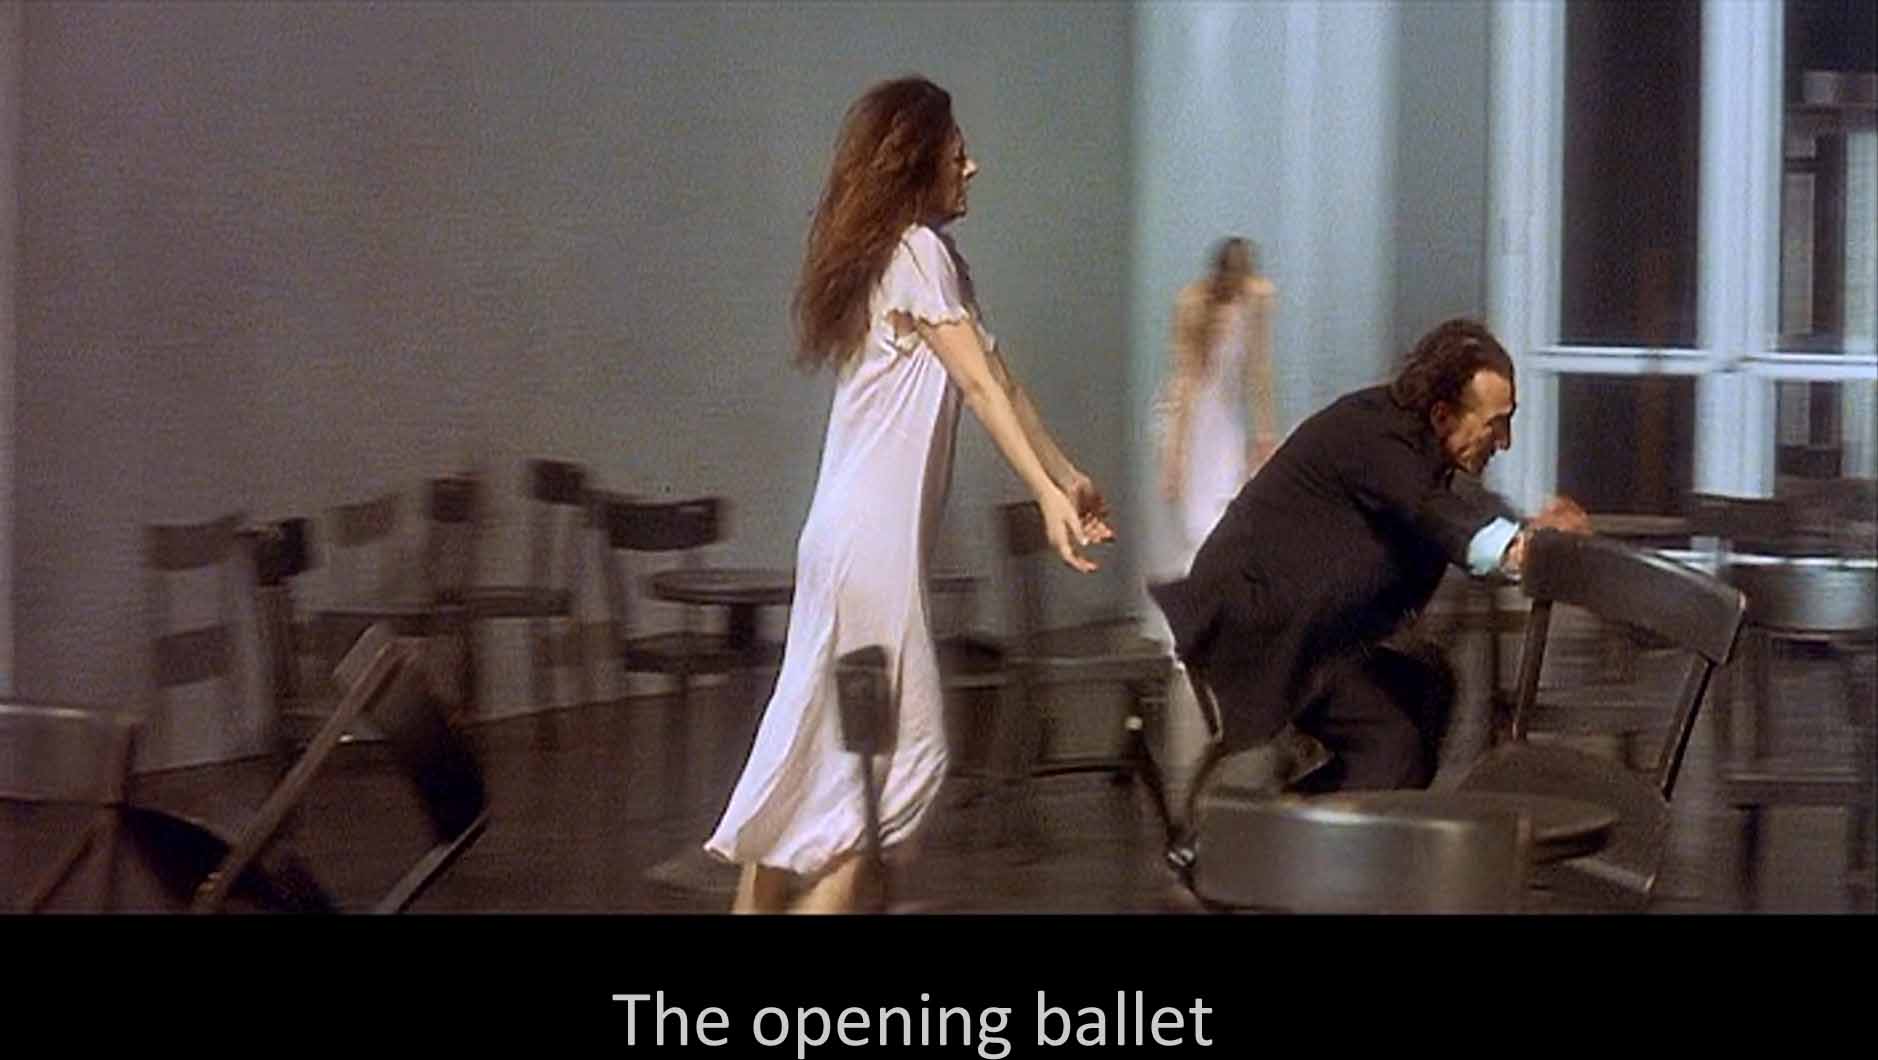 The opening ballet